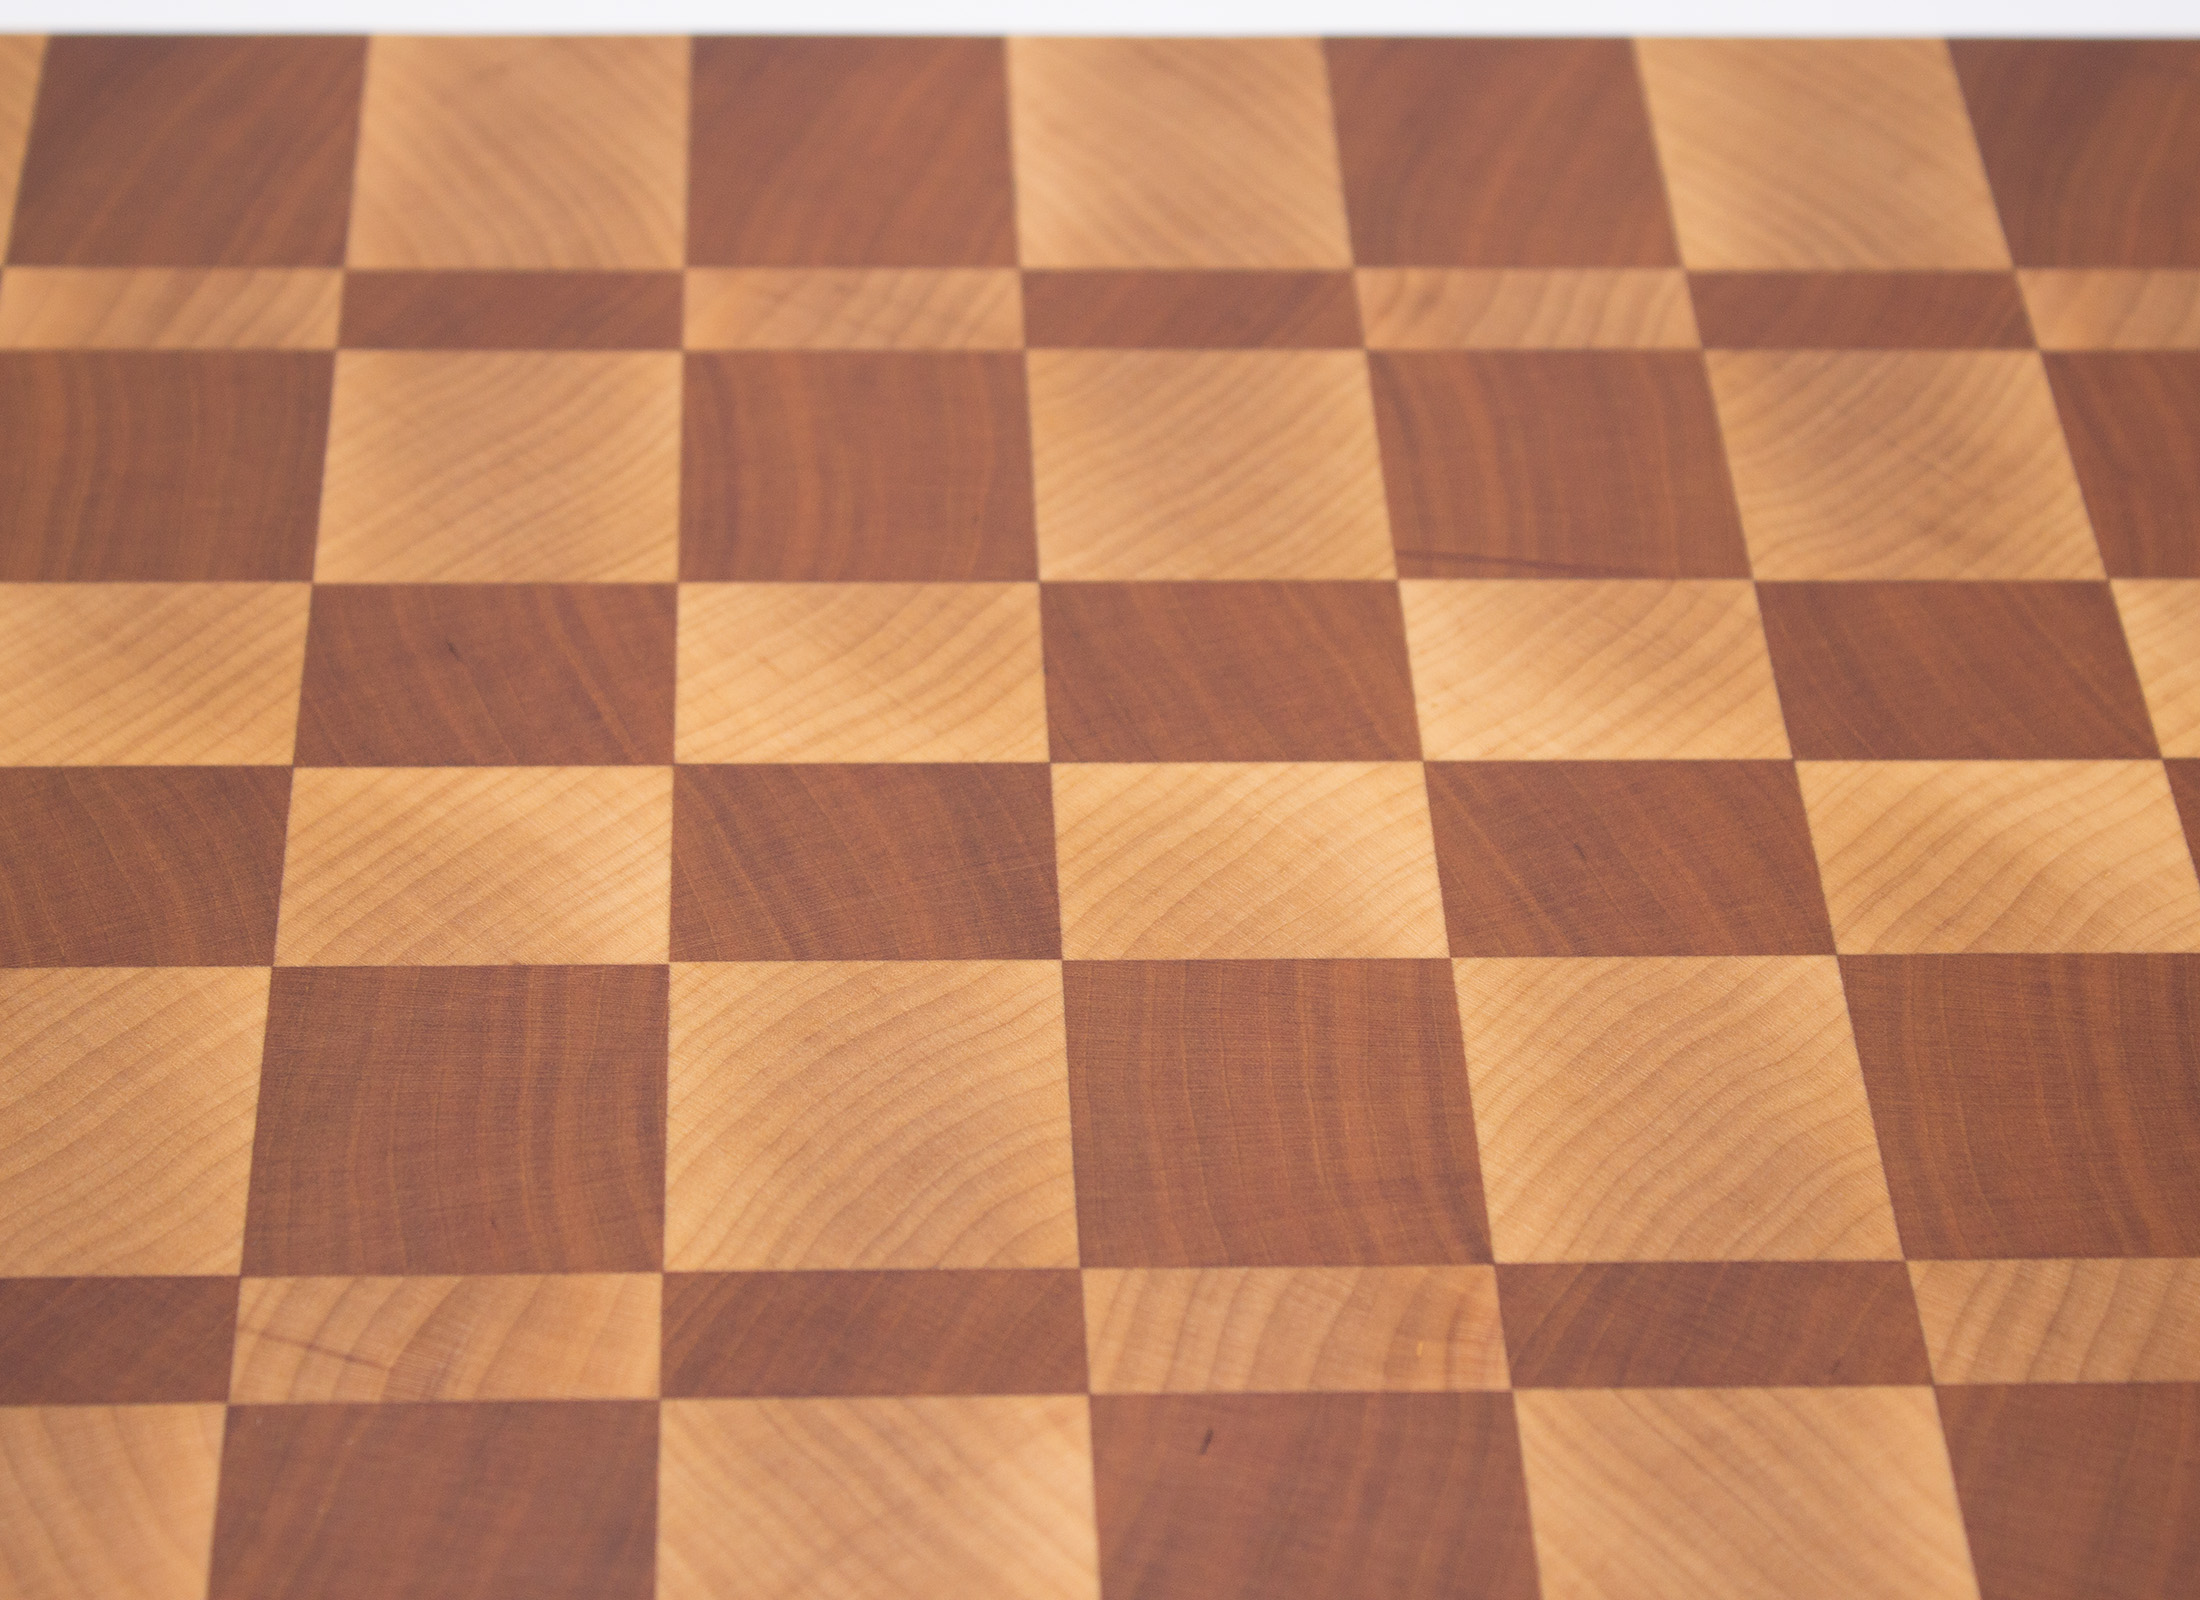 Cherry and Maple Chess Board 